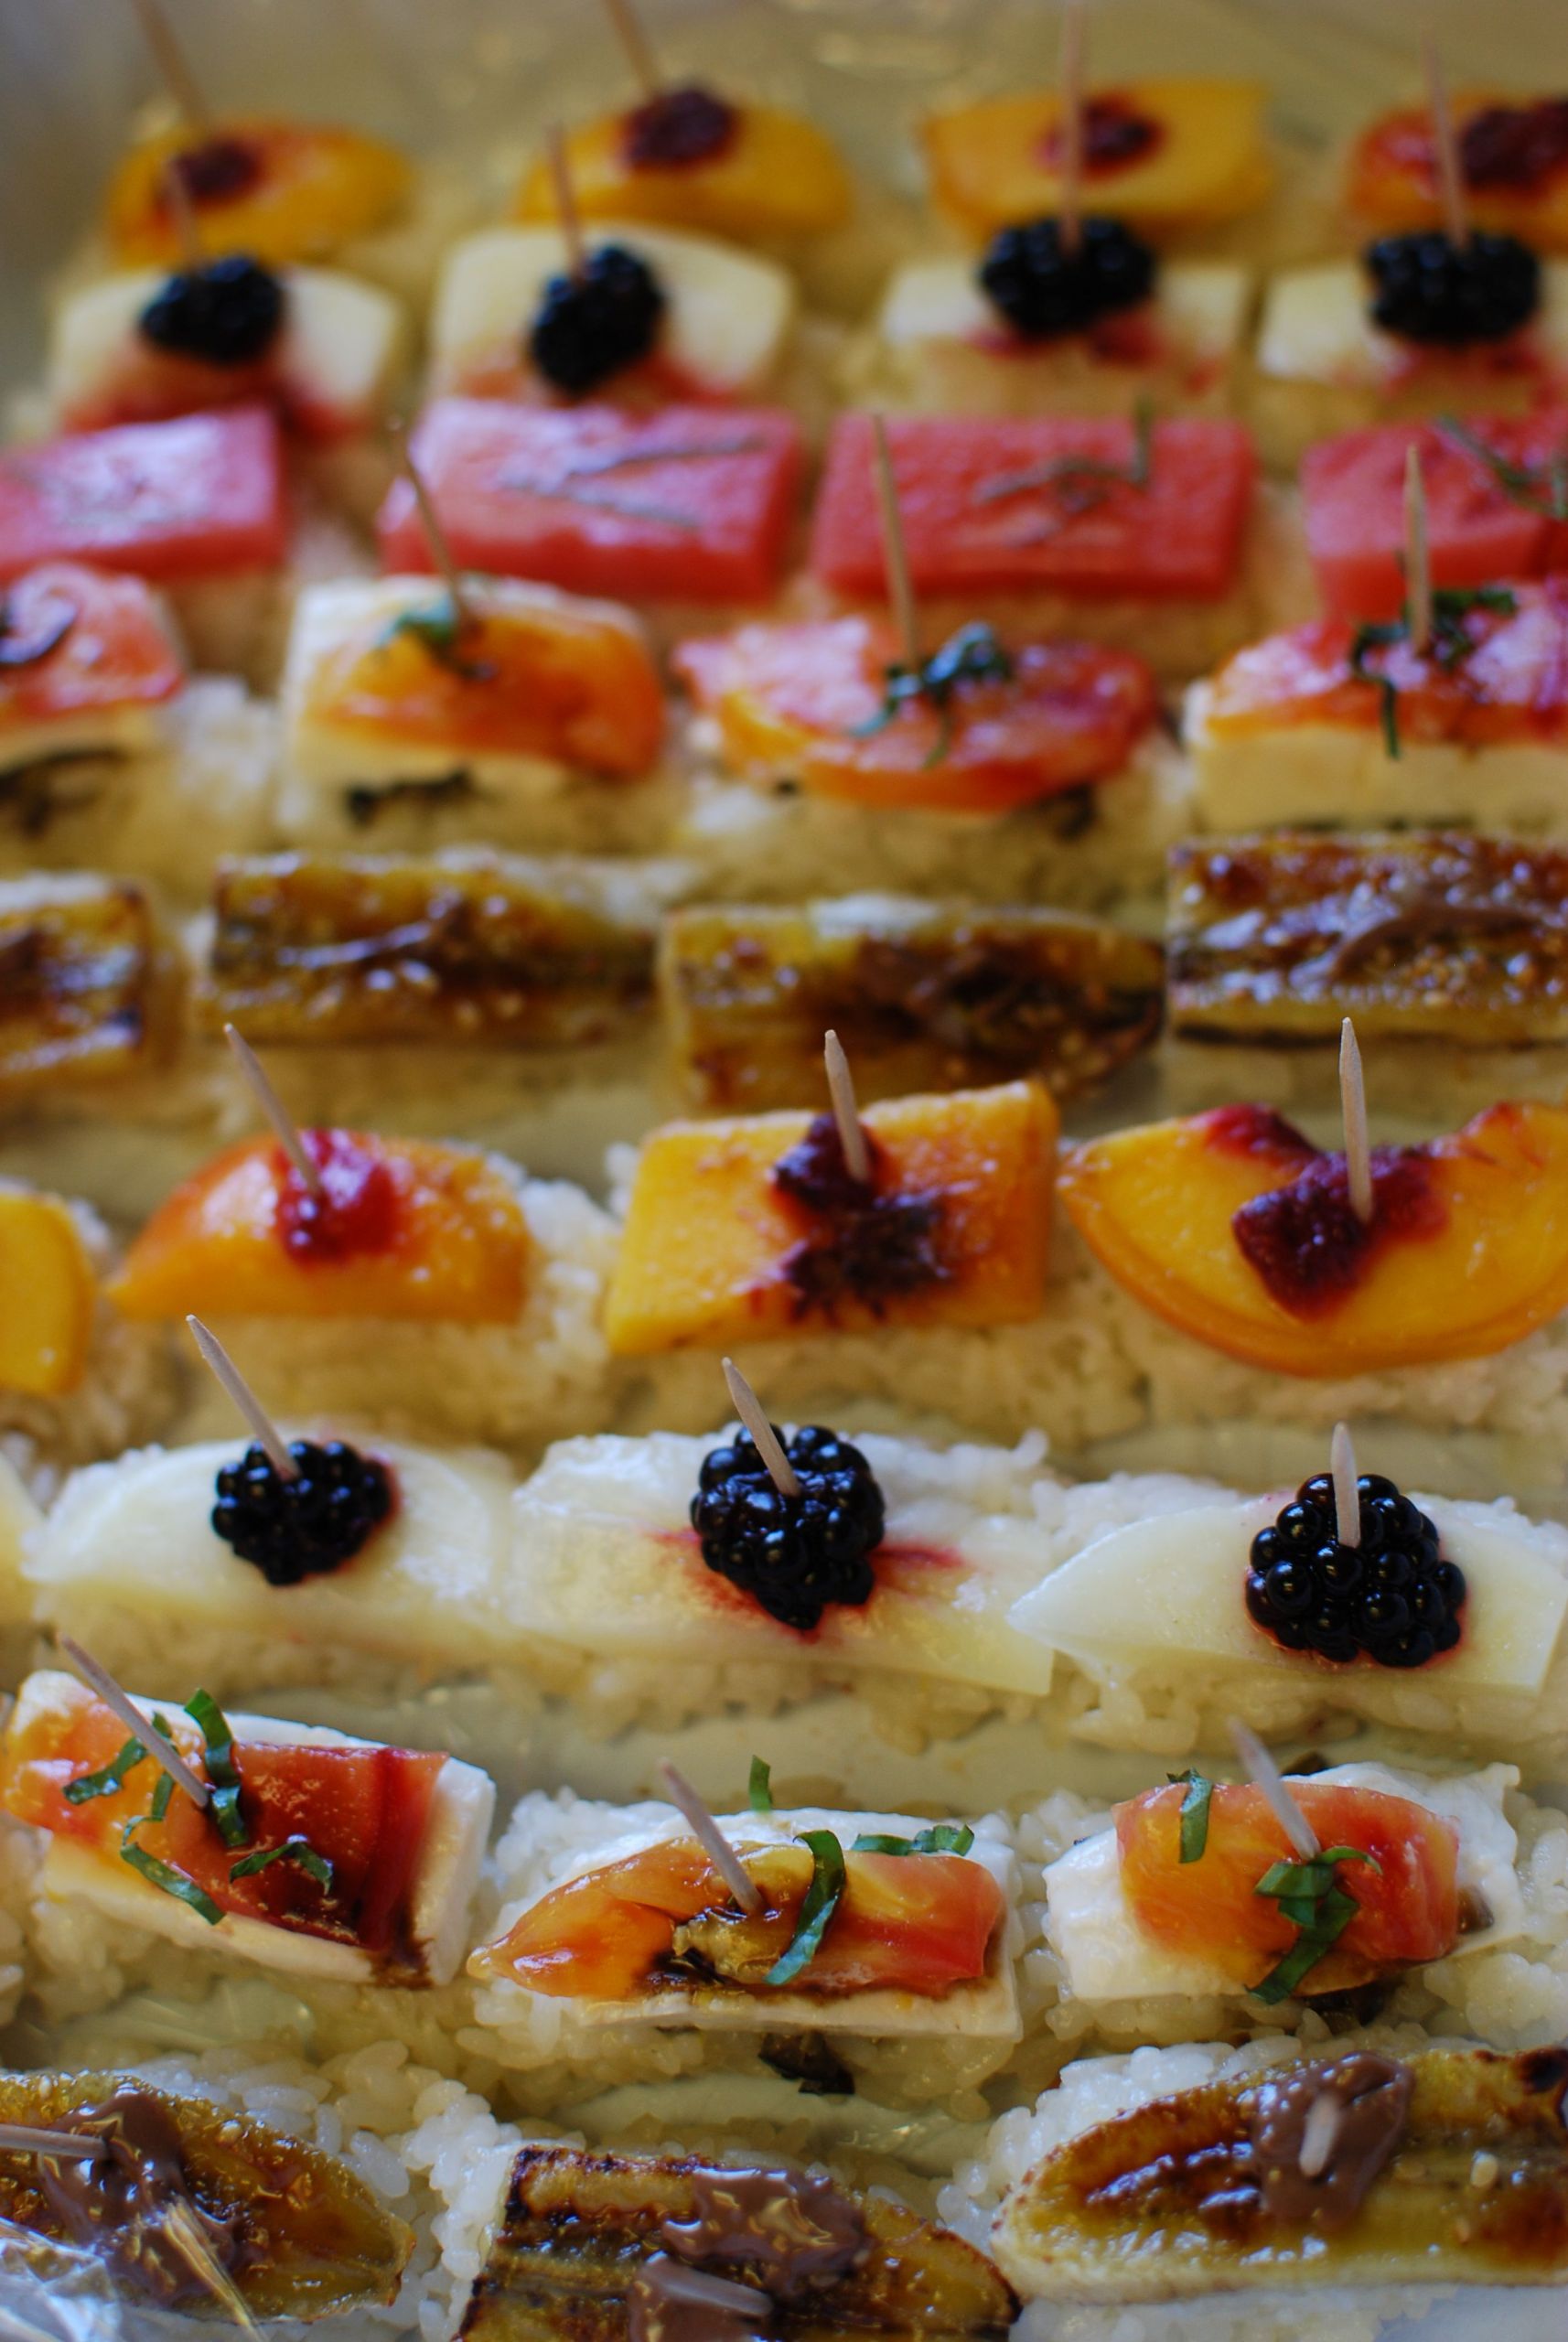 Deli Sushi And Desserts
 fruit sushi catering style